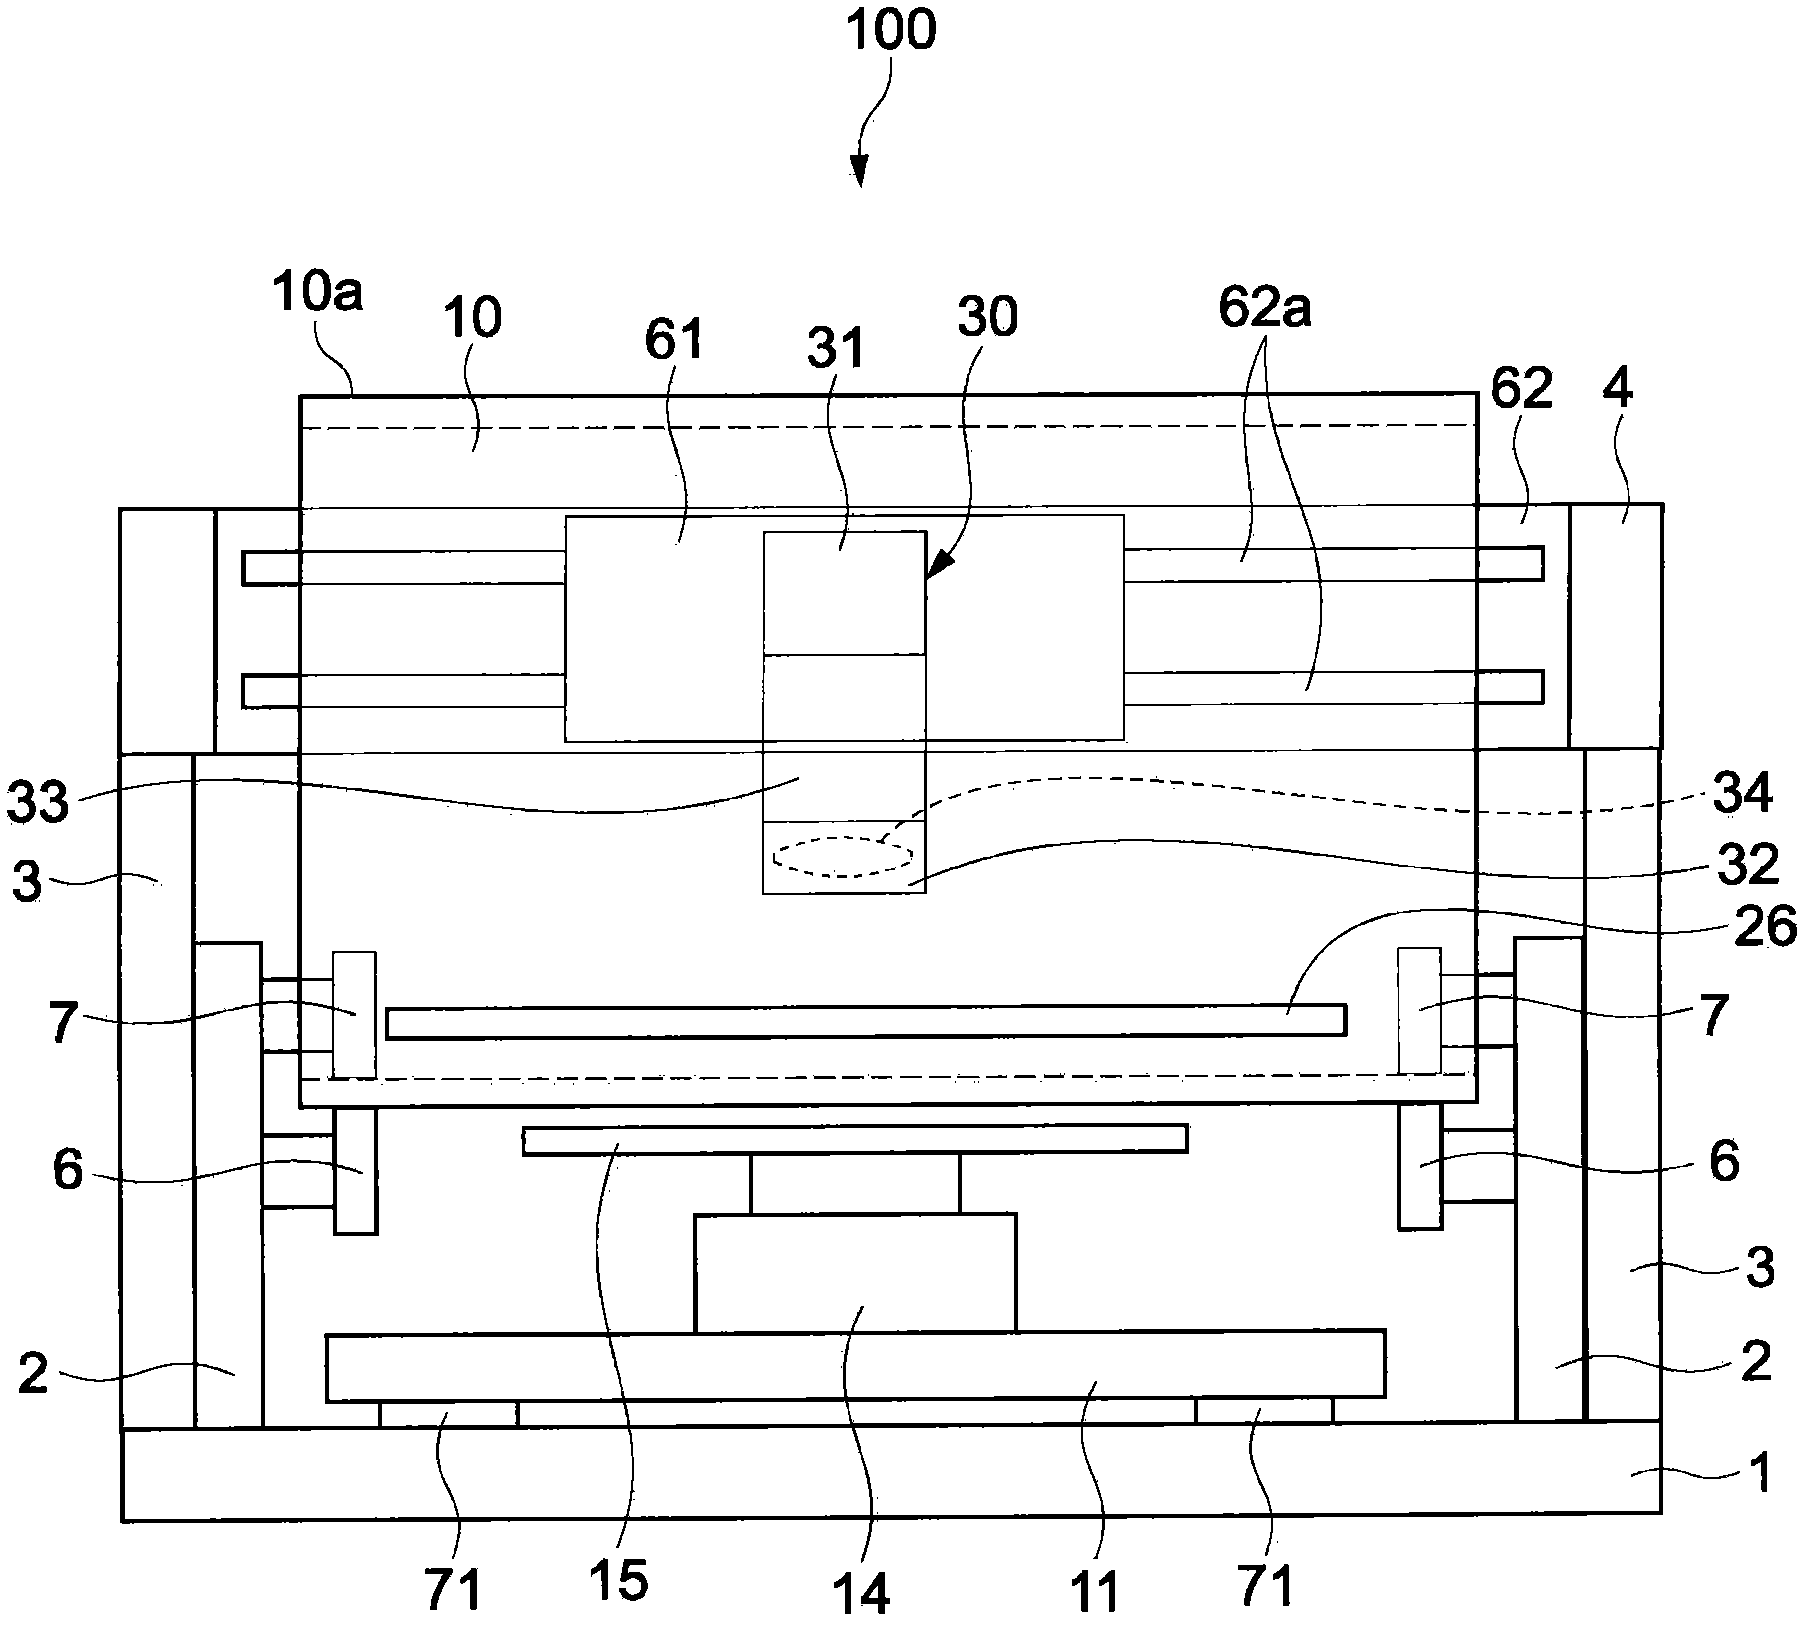 Three-dimensional modeling apparatus, object, and method of manufacturing an object